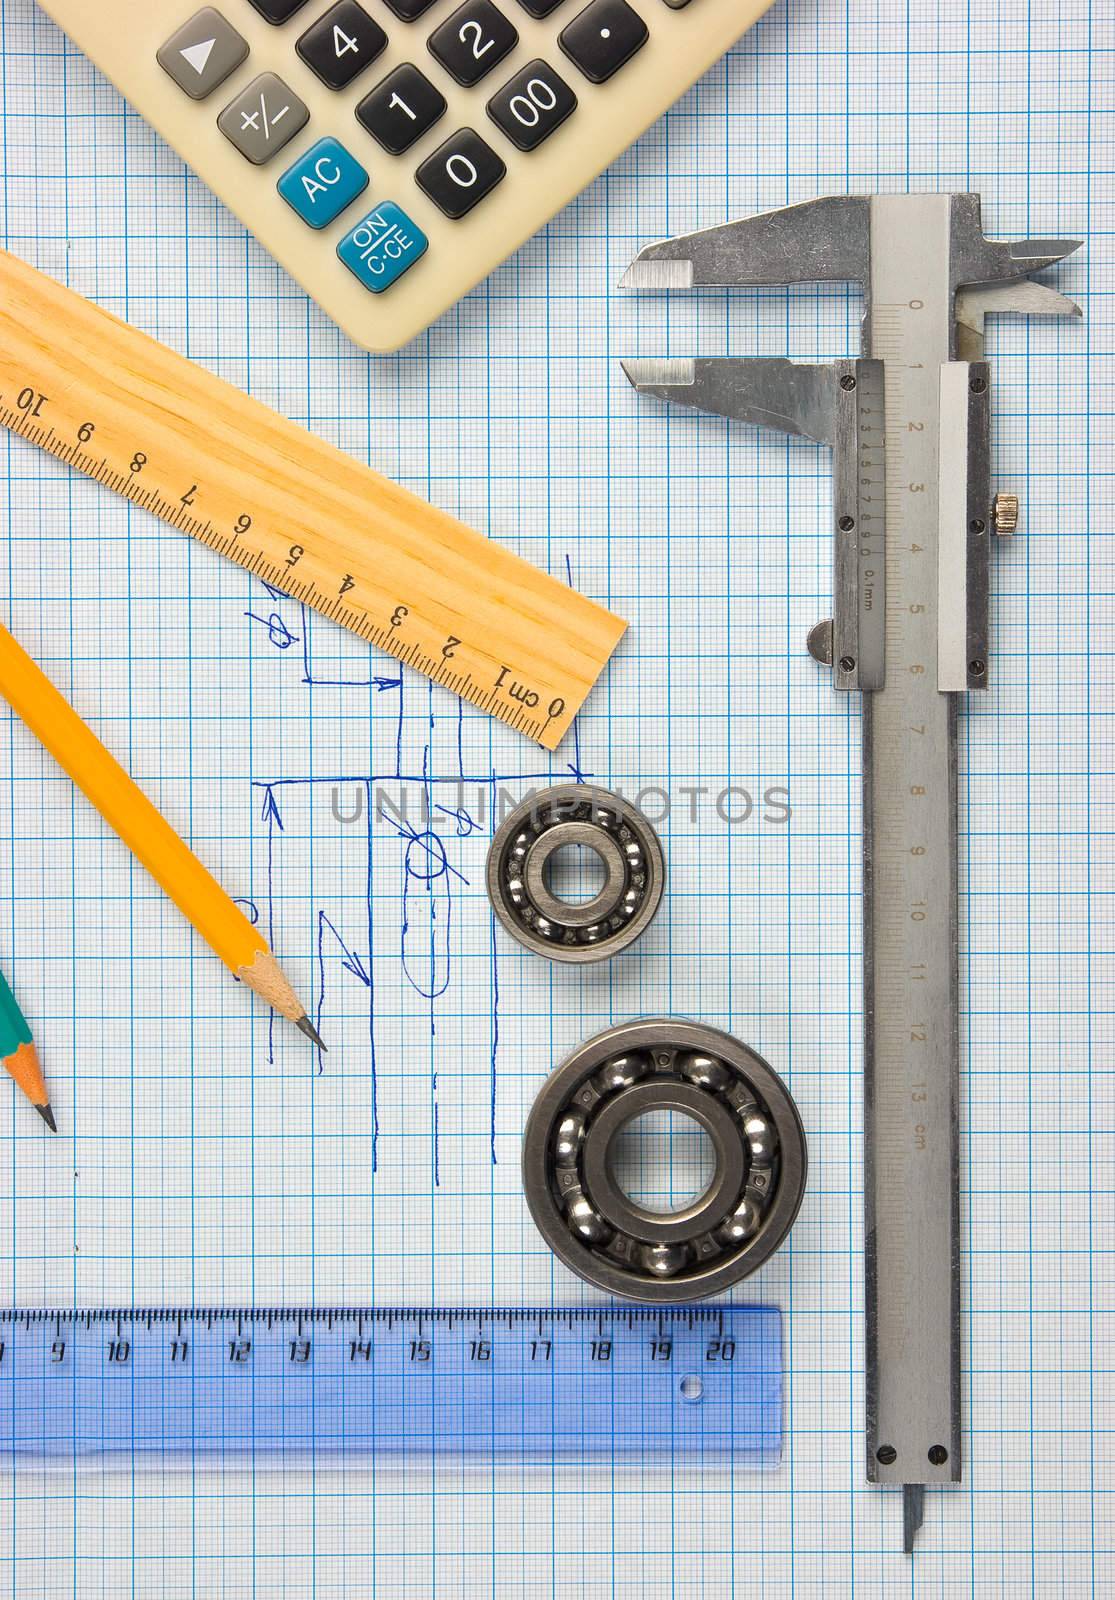 calipers, bearing and square on the background of graph paper